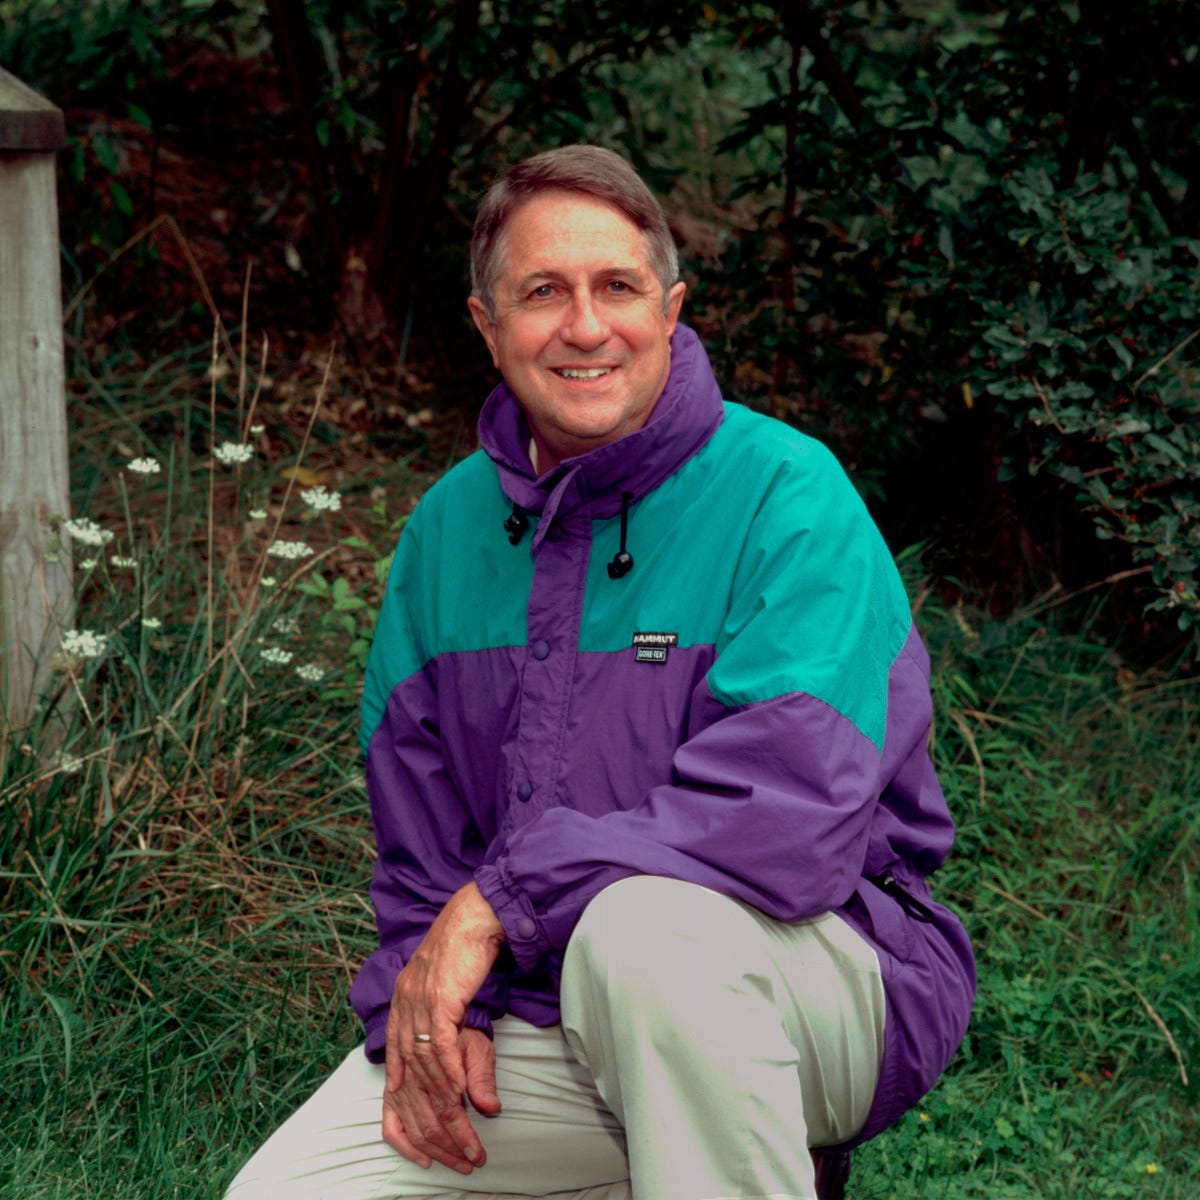 Bob Gore, inventor of Gore-Tex, has passed away at 83 - SNEWS